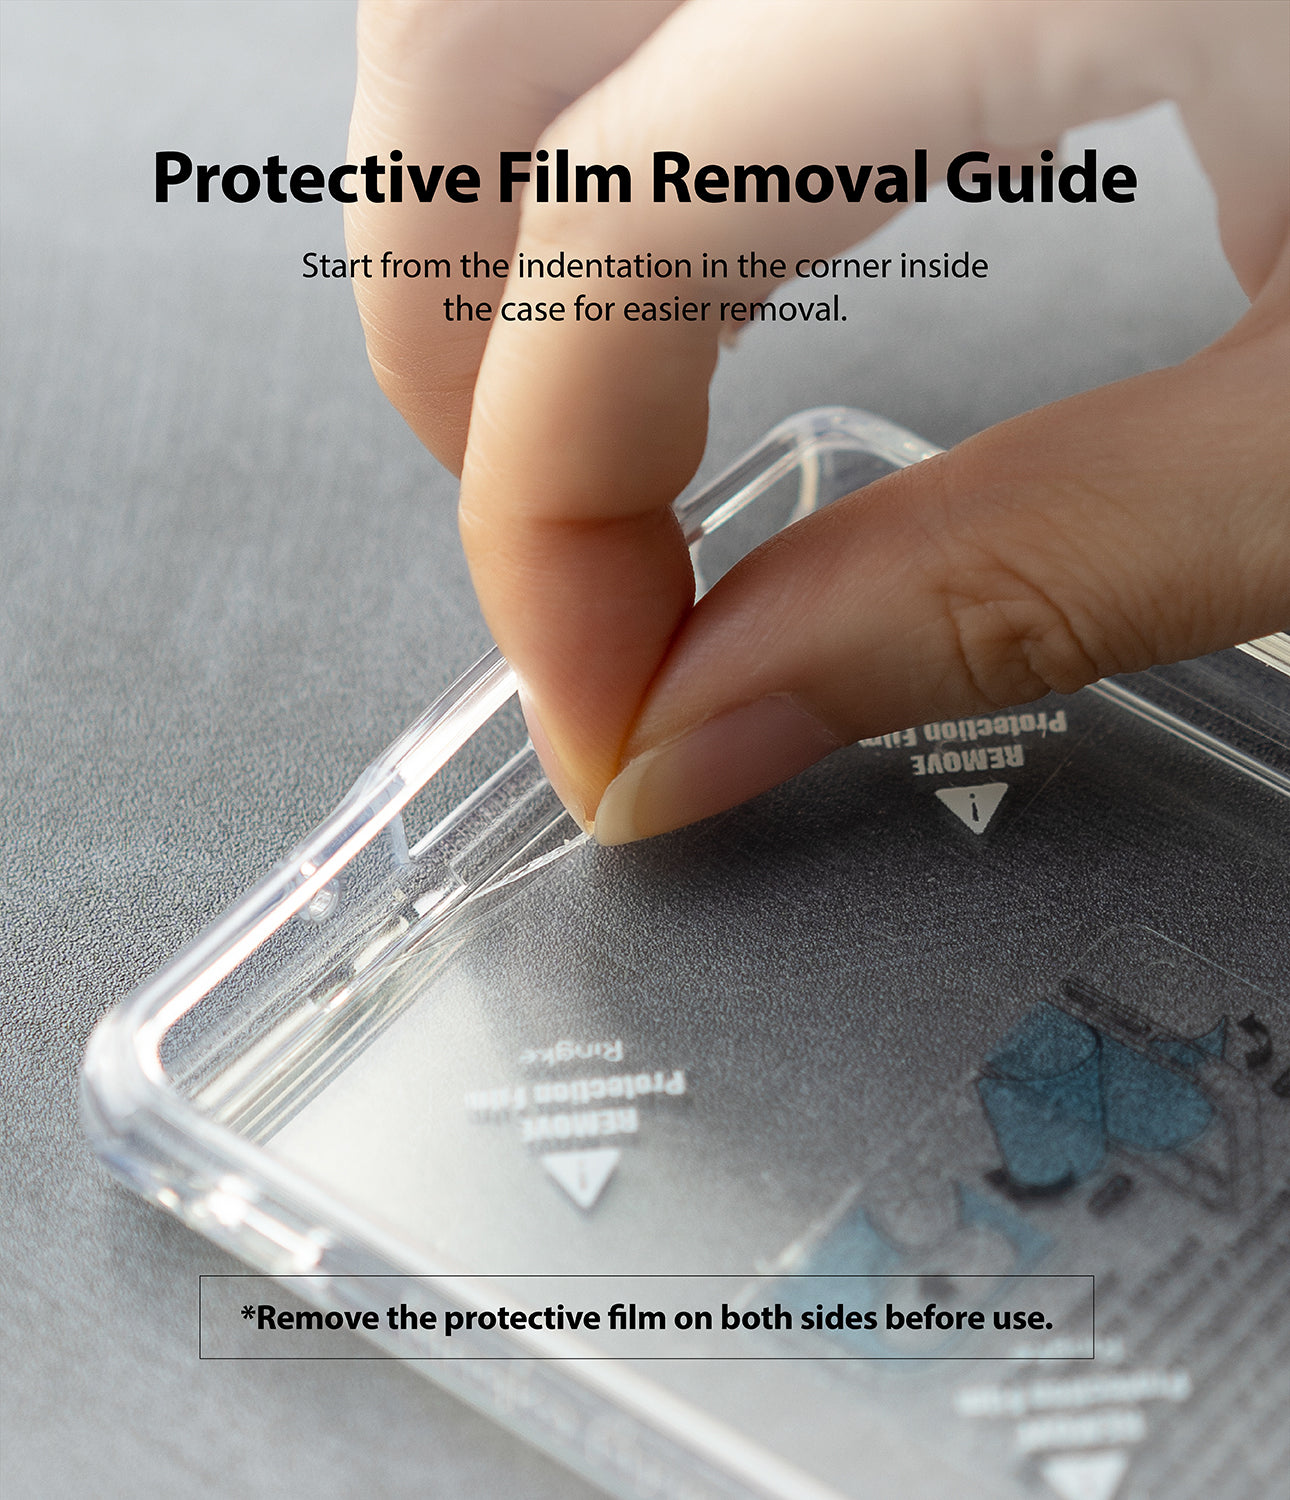 protective film removal guide - start from the indentation in the corner inside the case for easier removal